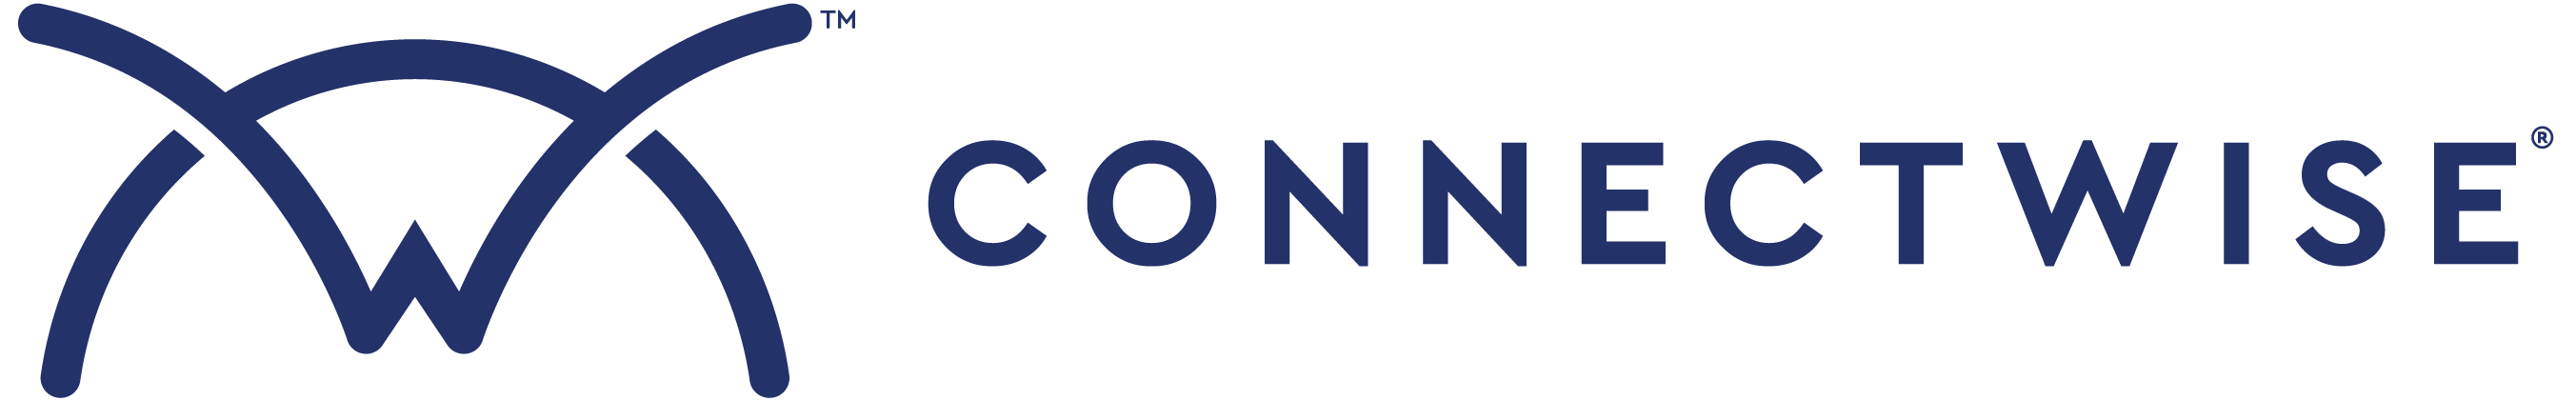 ConnectWise logo, horizontal full color